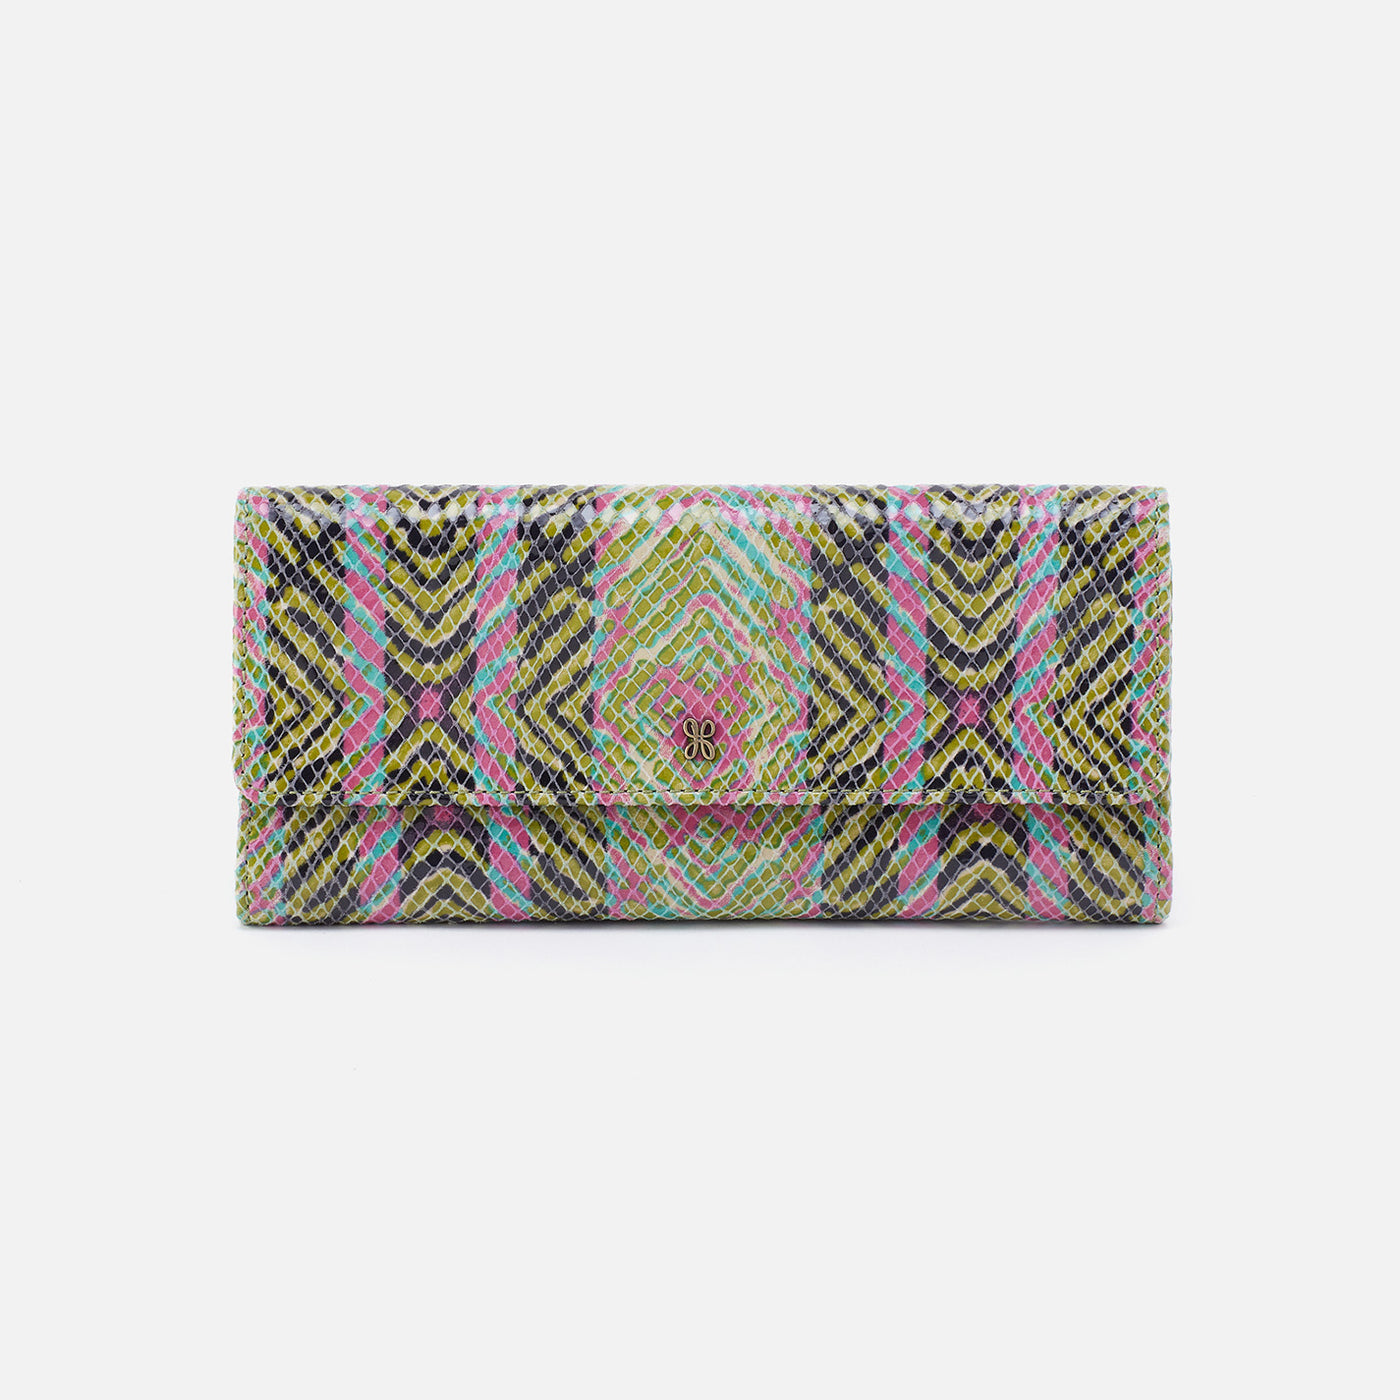 Jill Large Trifold Continental Wallet in Printed Leather - Geo Diamond Print